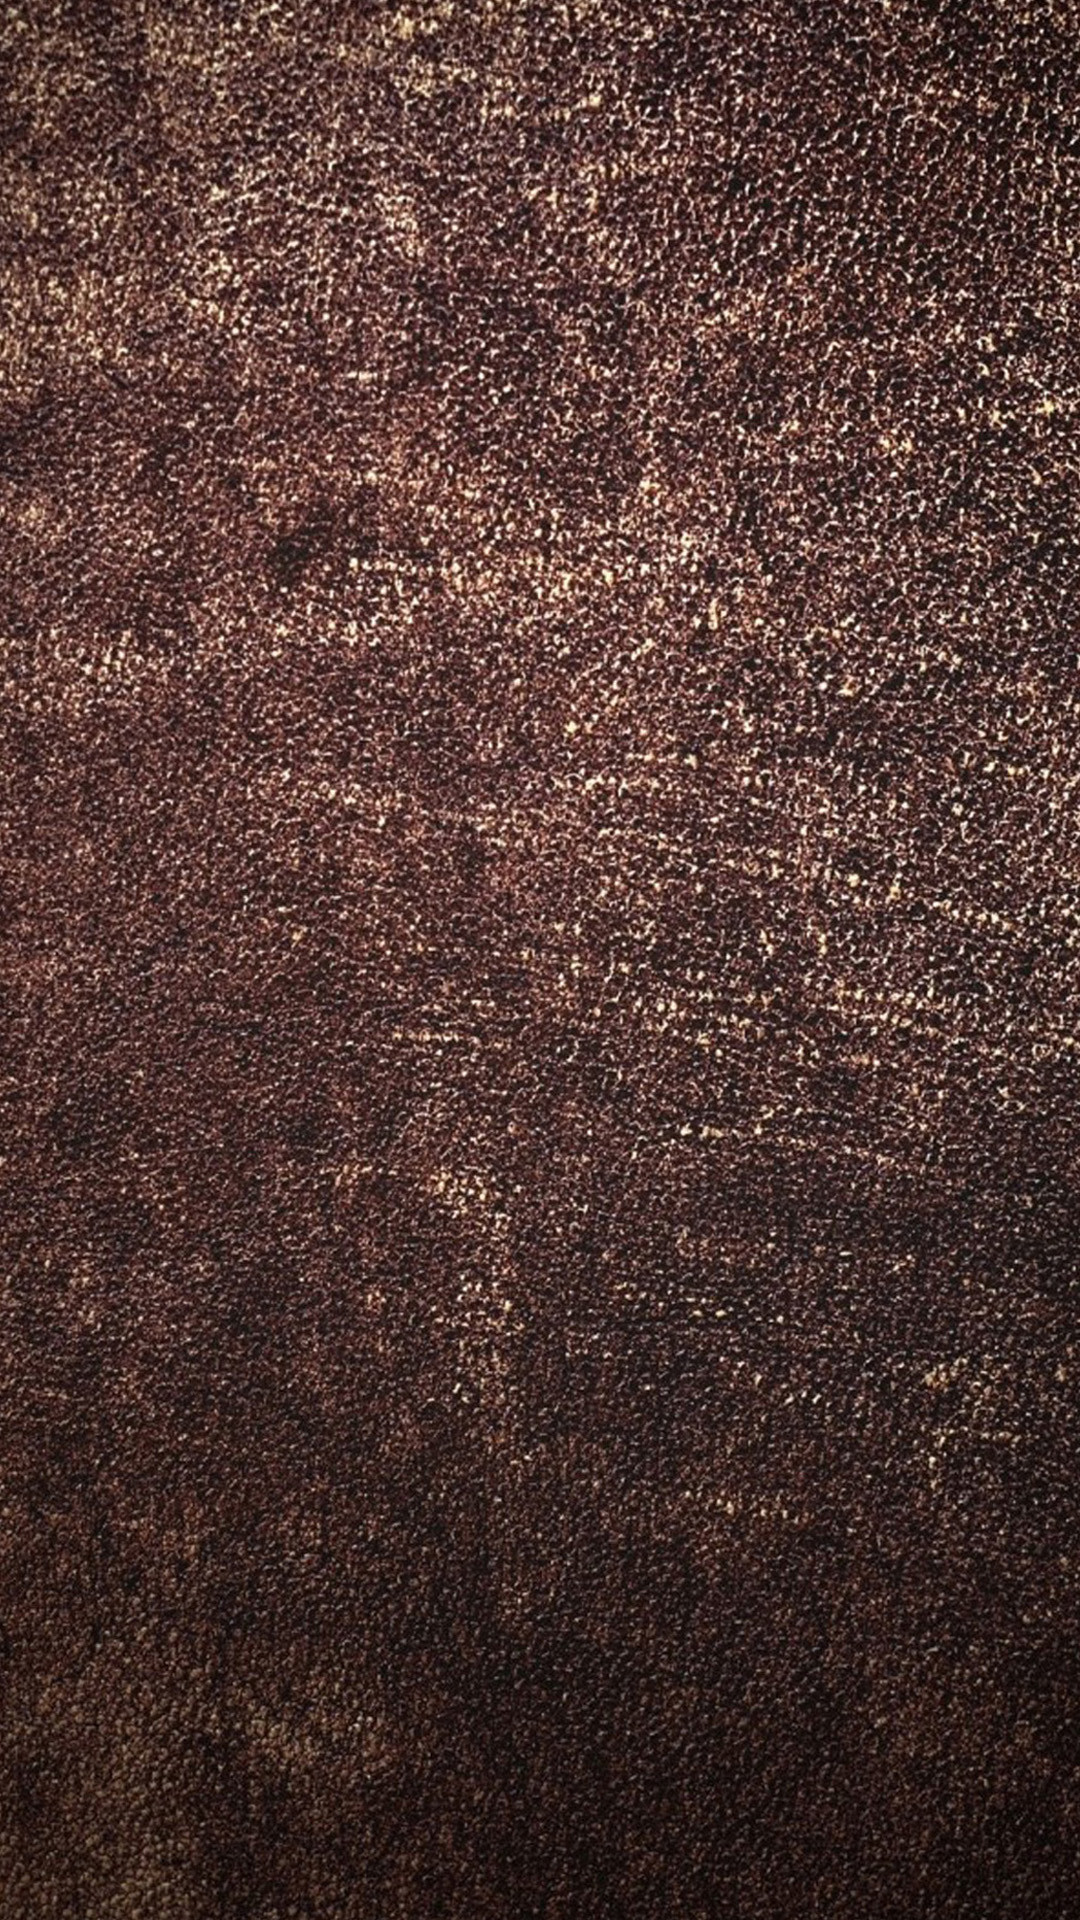 1080x1920 Brown Leather Sony Xperia Z2 Wallpapers